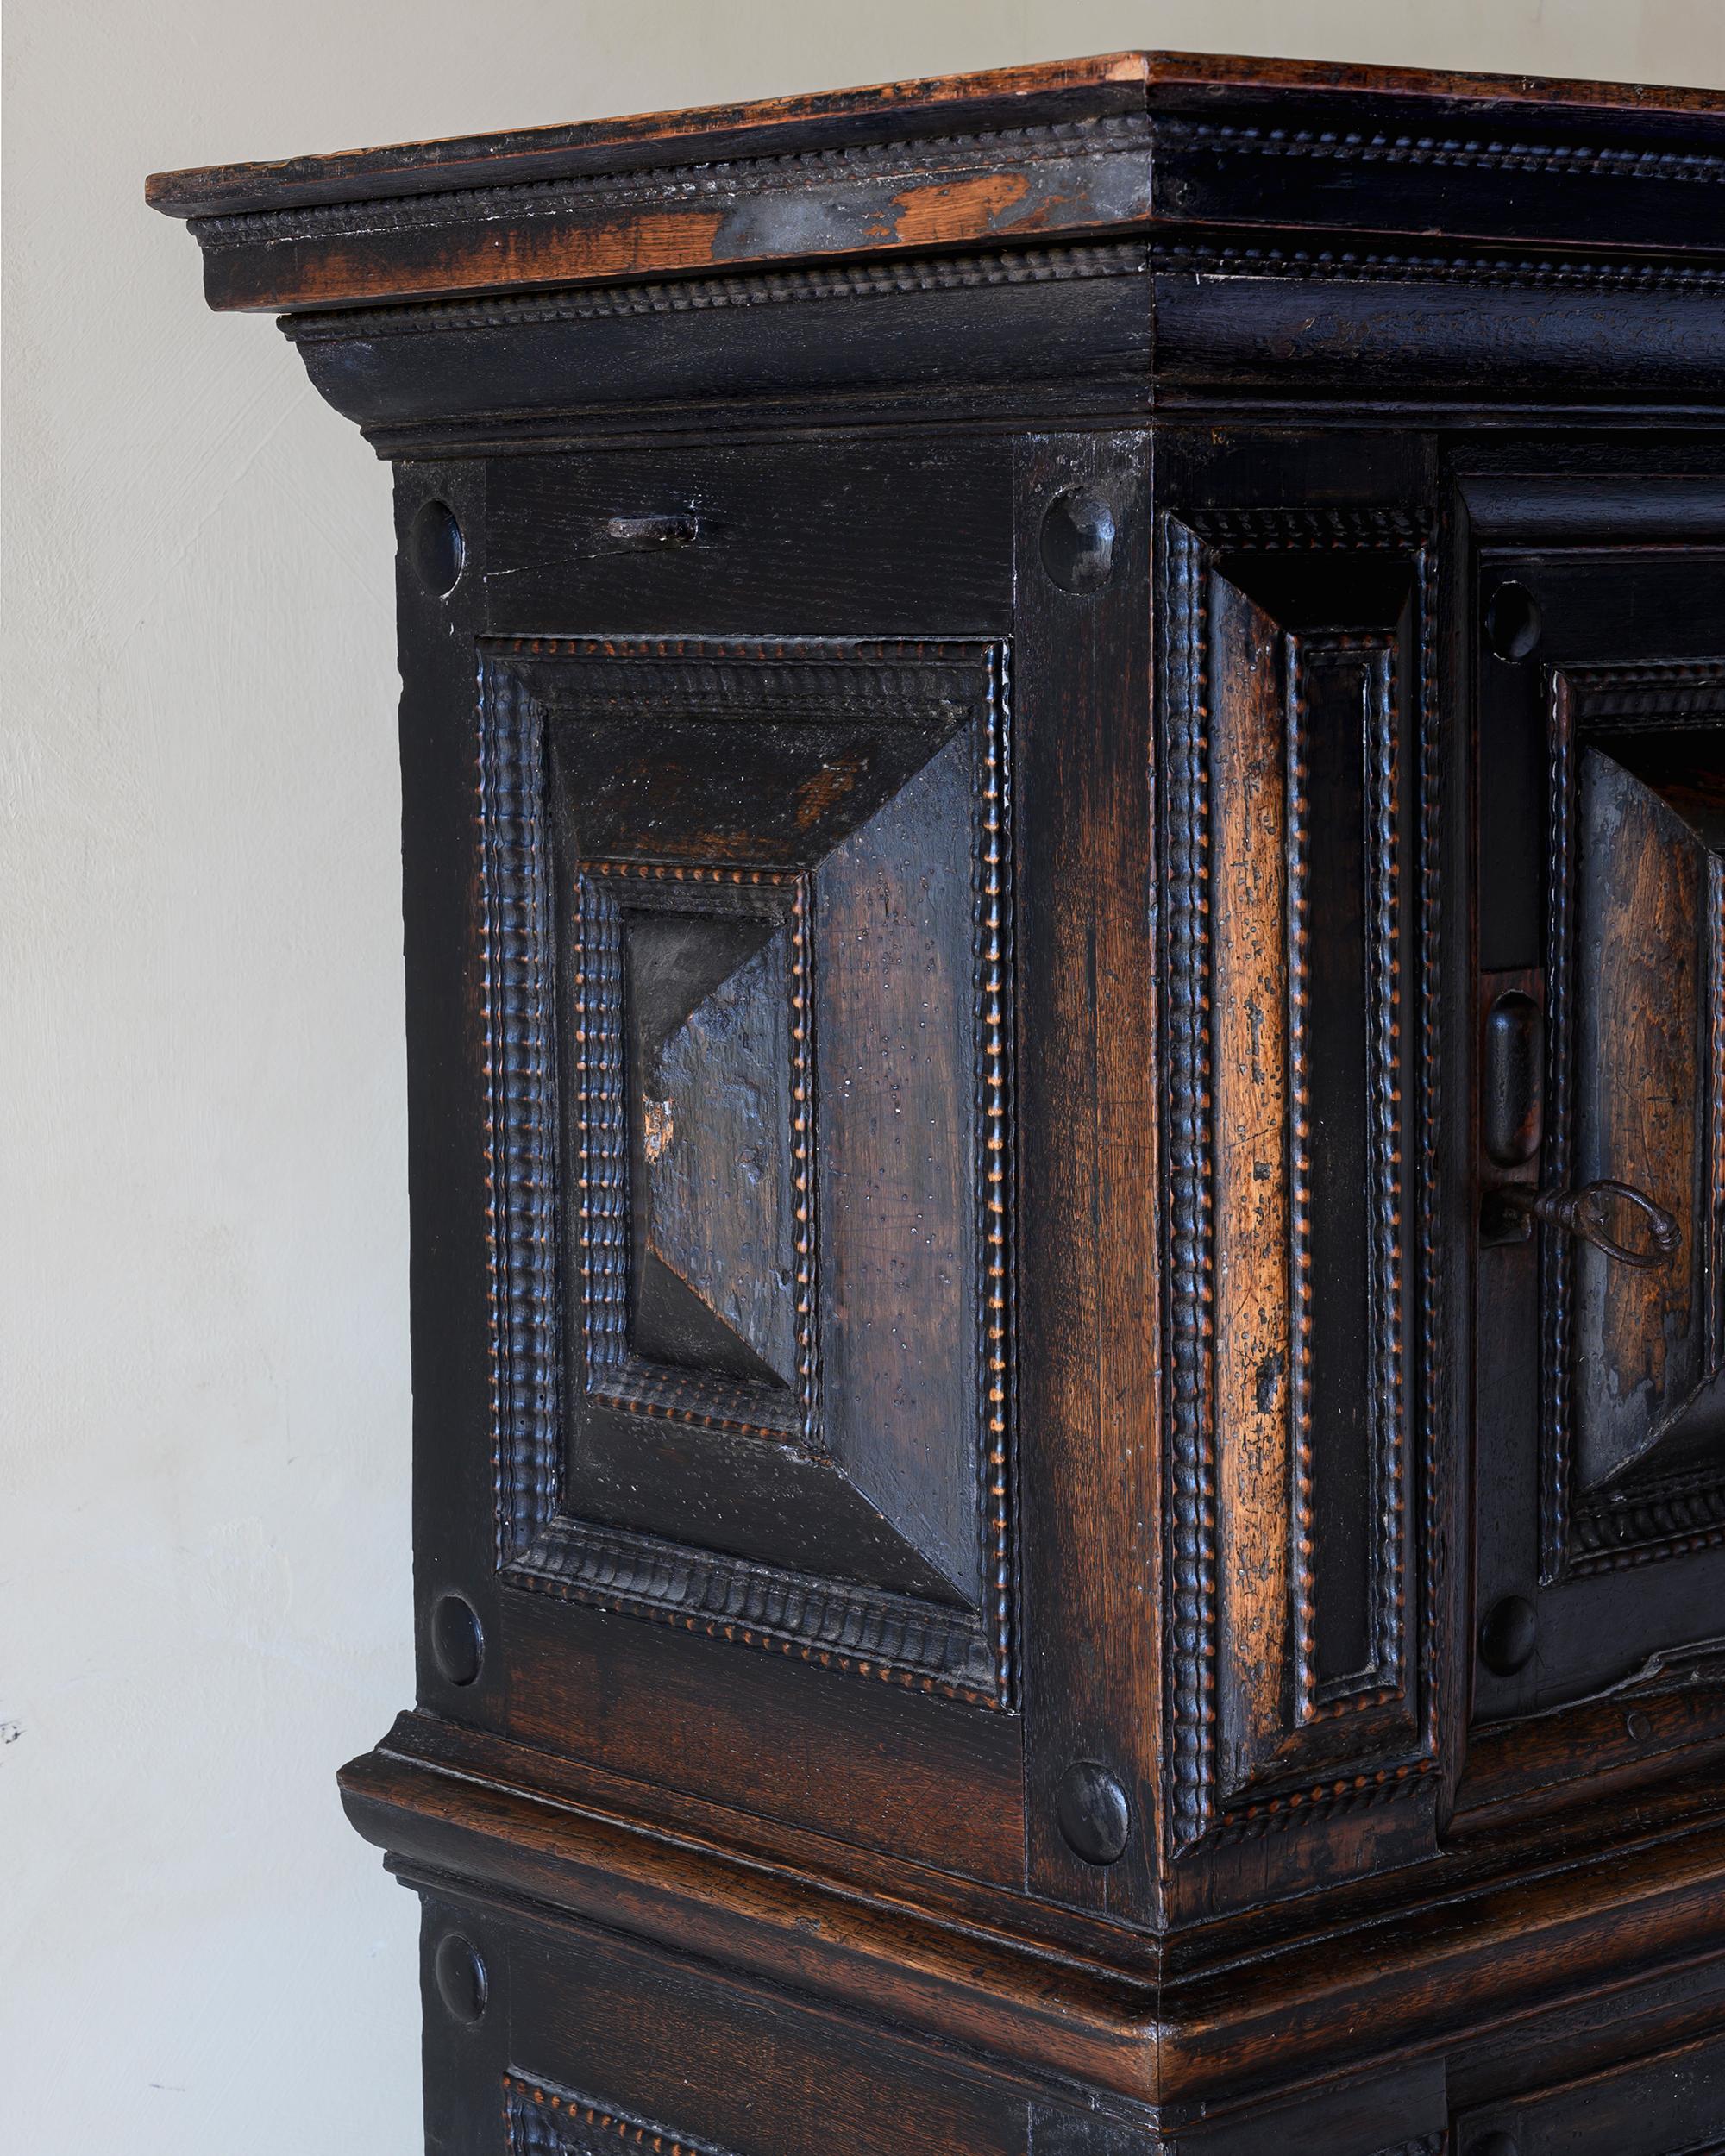 Remarkable Late 17th Century Swedish Baroque Cabinet In Good Condition For Sale In Mjöhult, SE